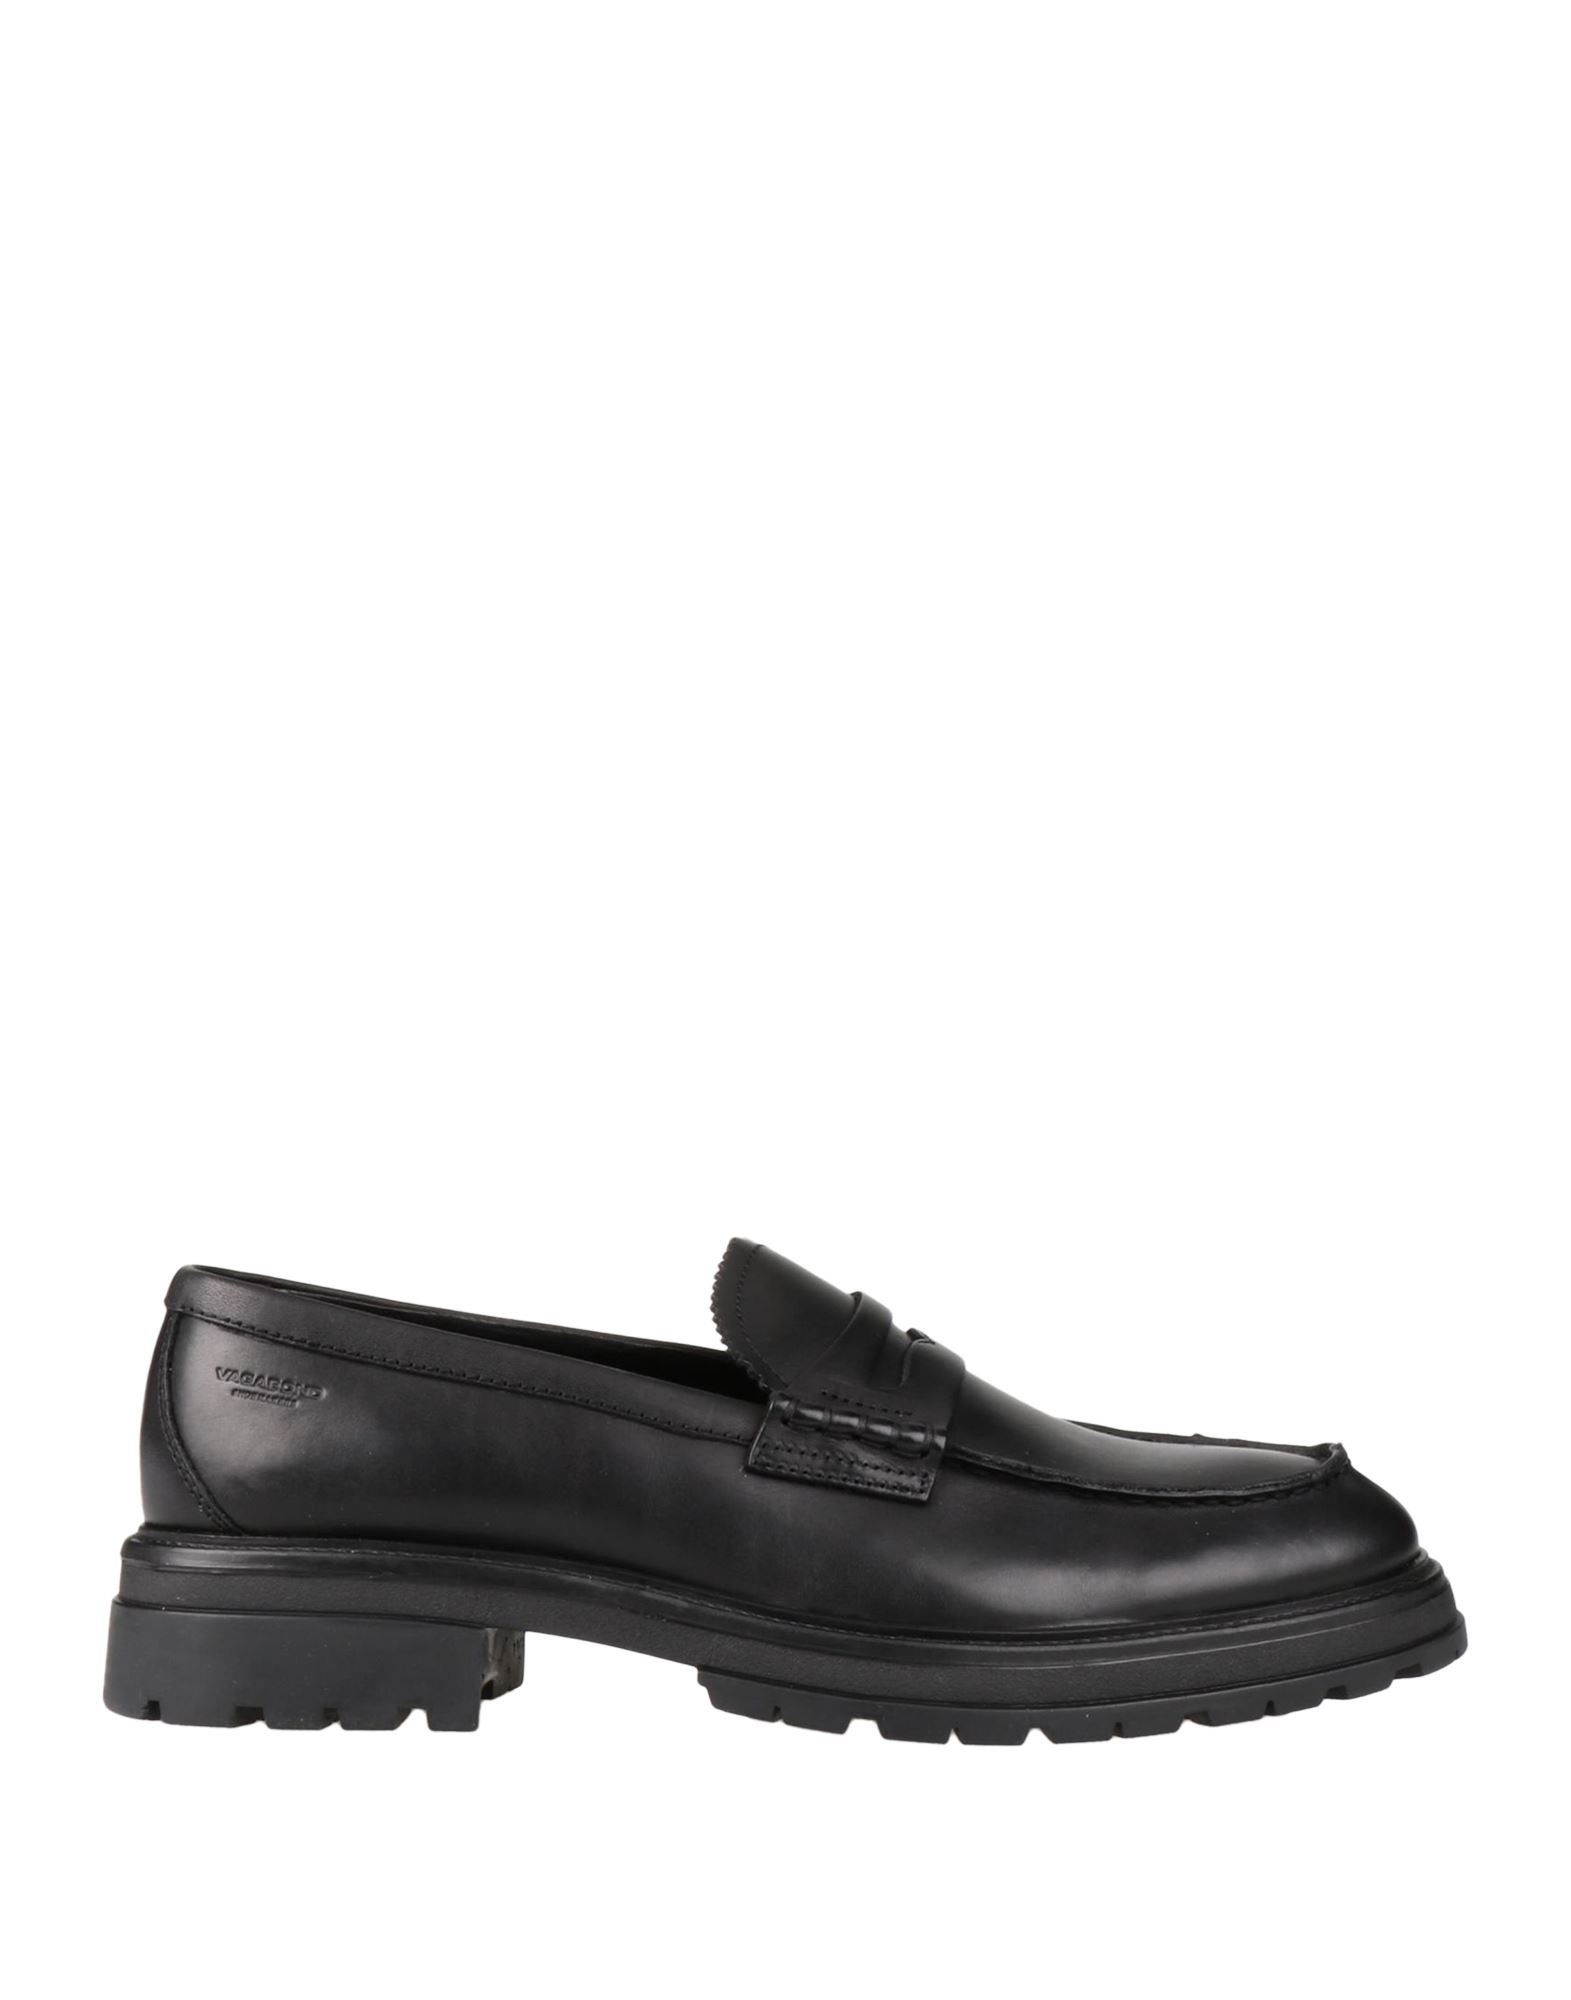 Vagabond Shoemakers Loafers In Black